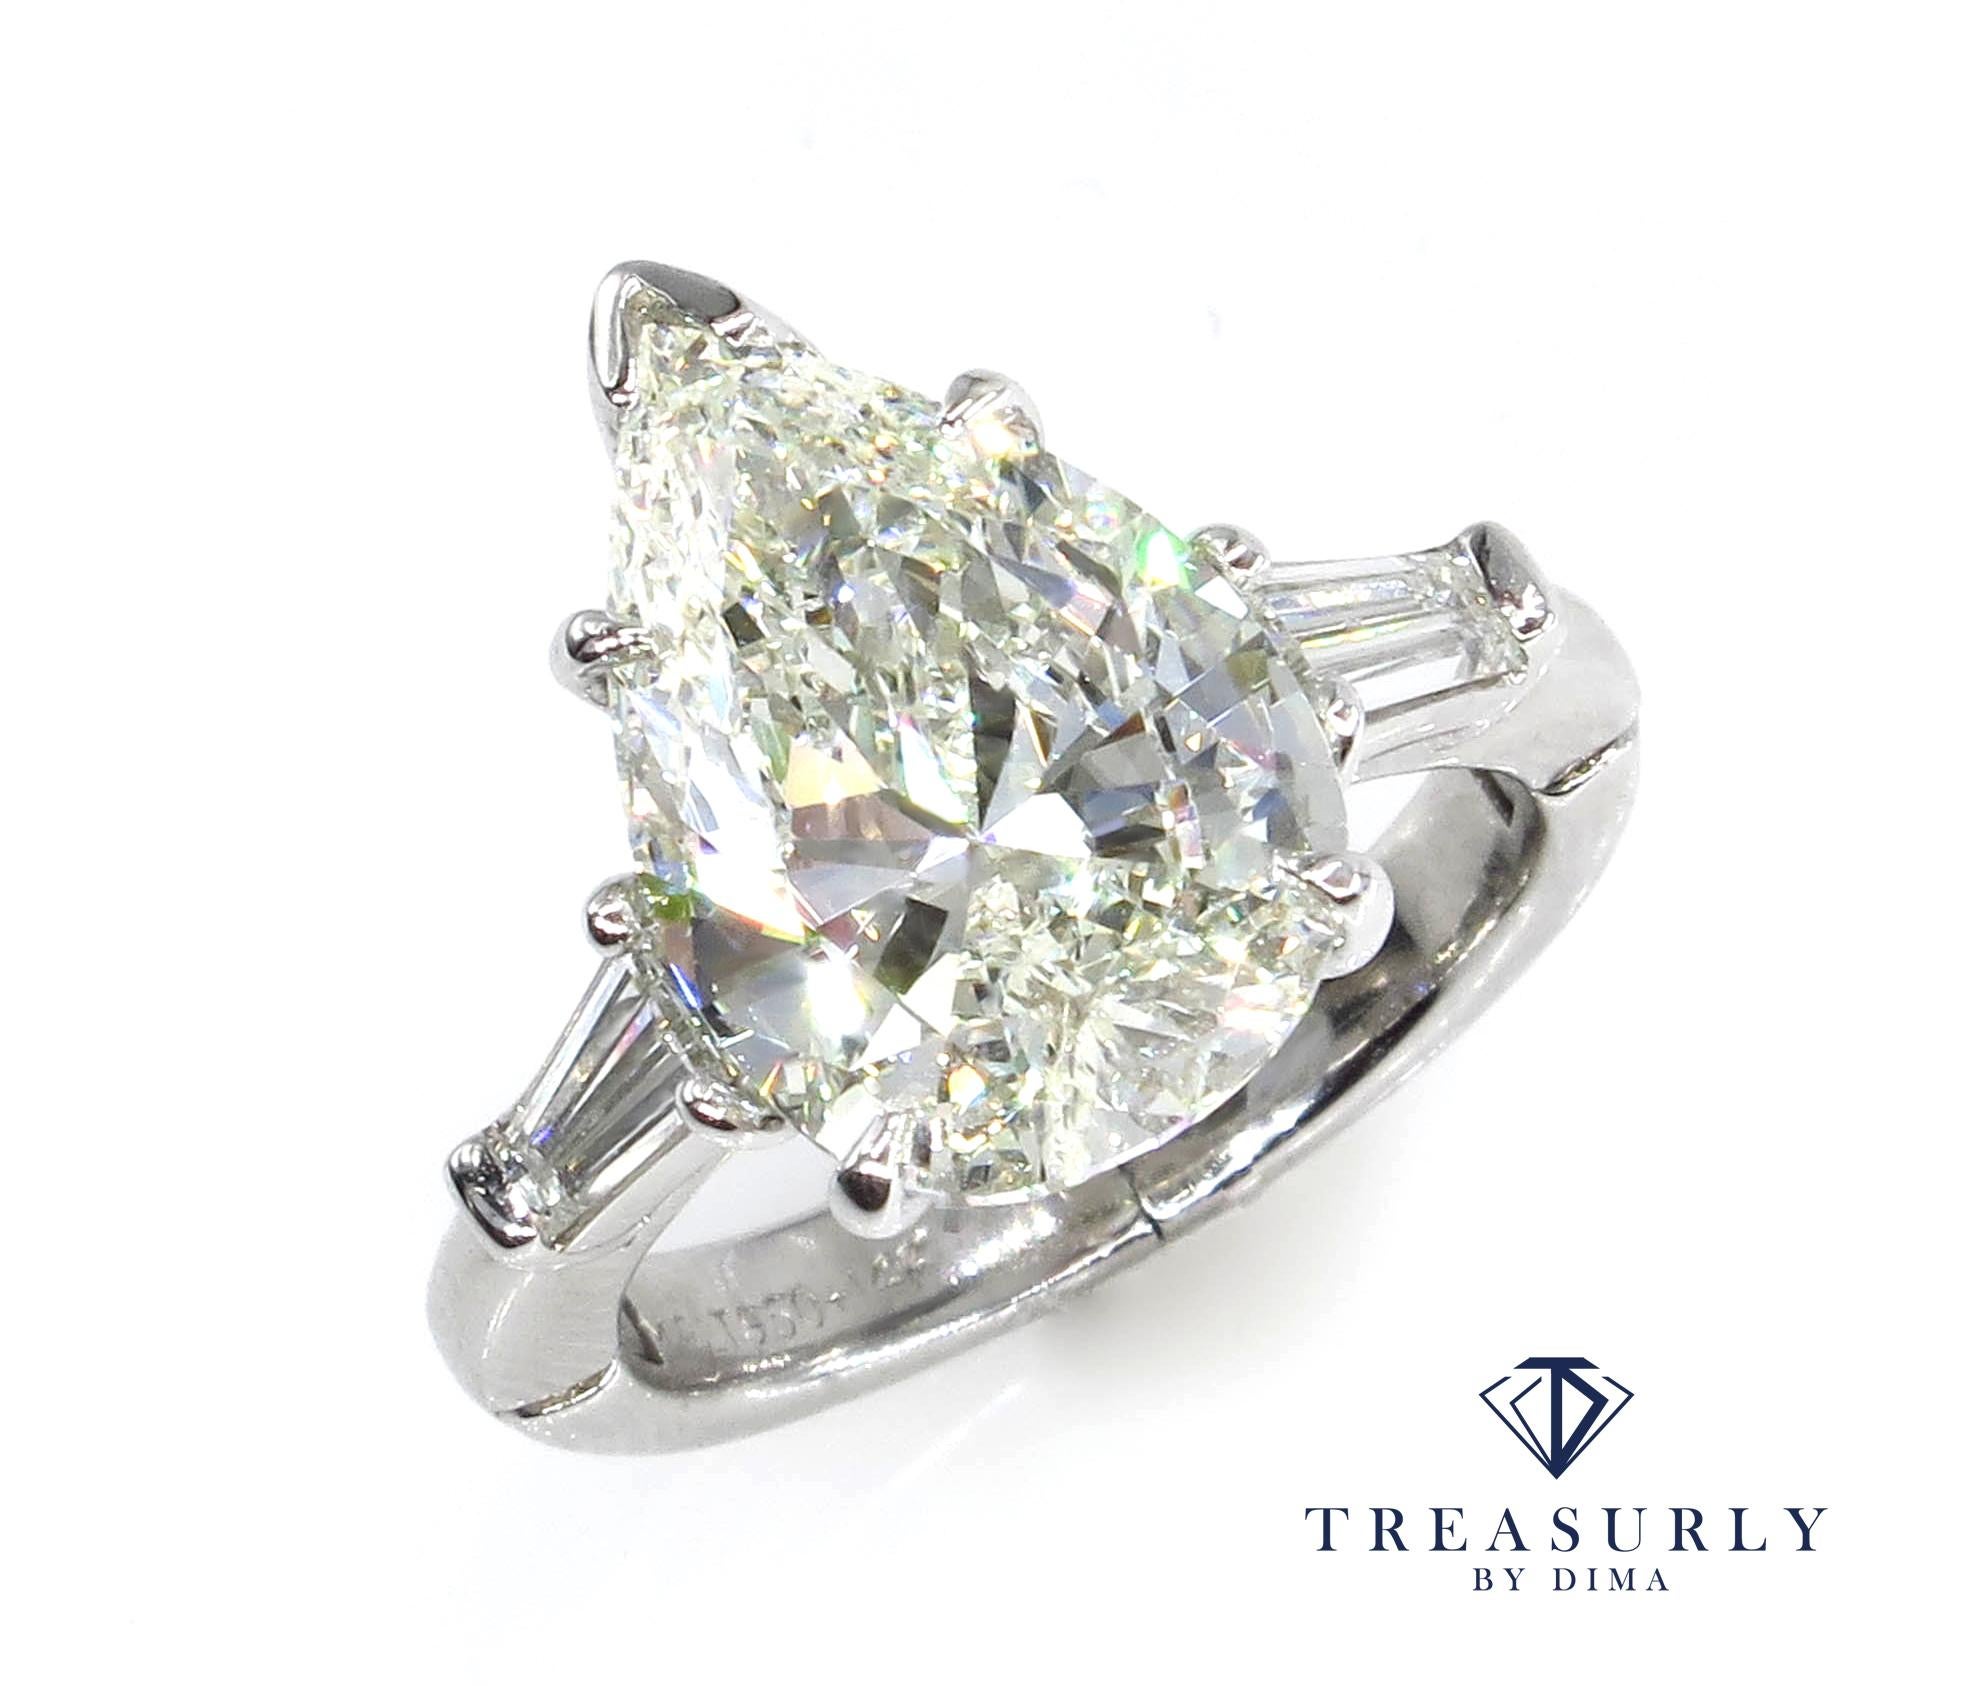 This a Beautiful, the most timeless and classic style - Estate Vintage 3 Stone Pear Shaped Ring with 2 Large baguettes weighing in total 4.51ctw.
Buy her this exquisite and the most classic, elegant diamond ring which will go beyond her dreams!
Your